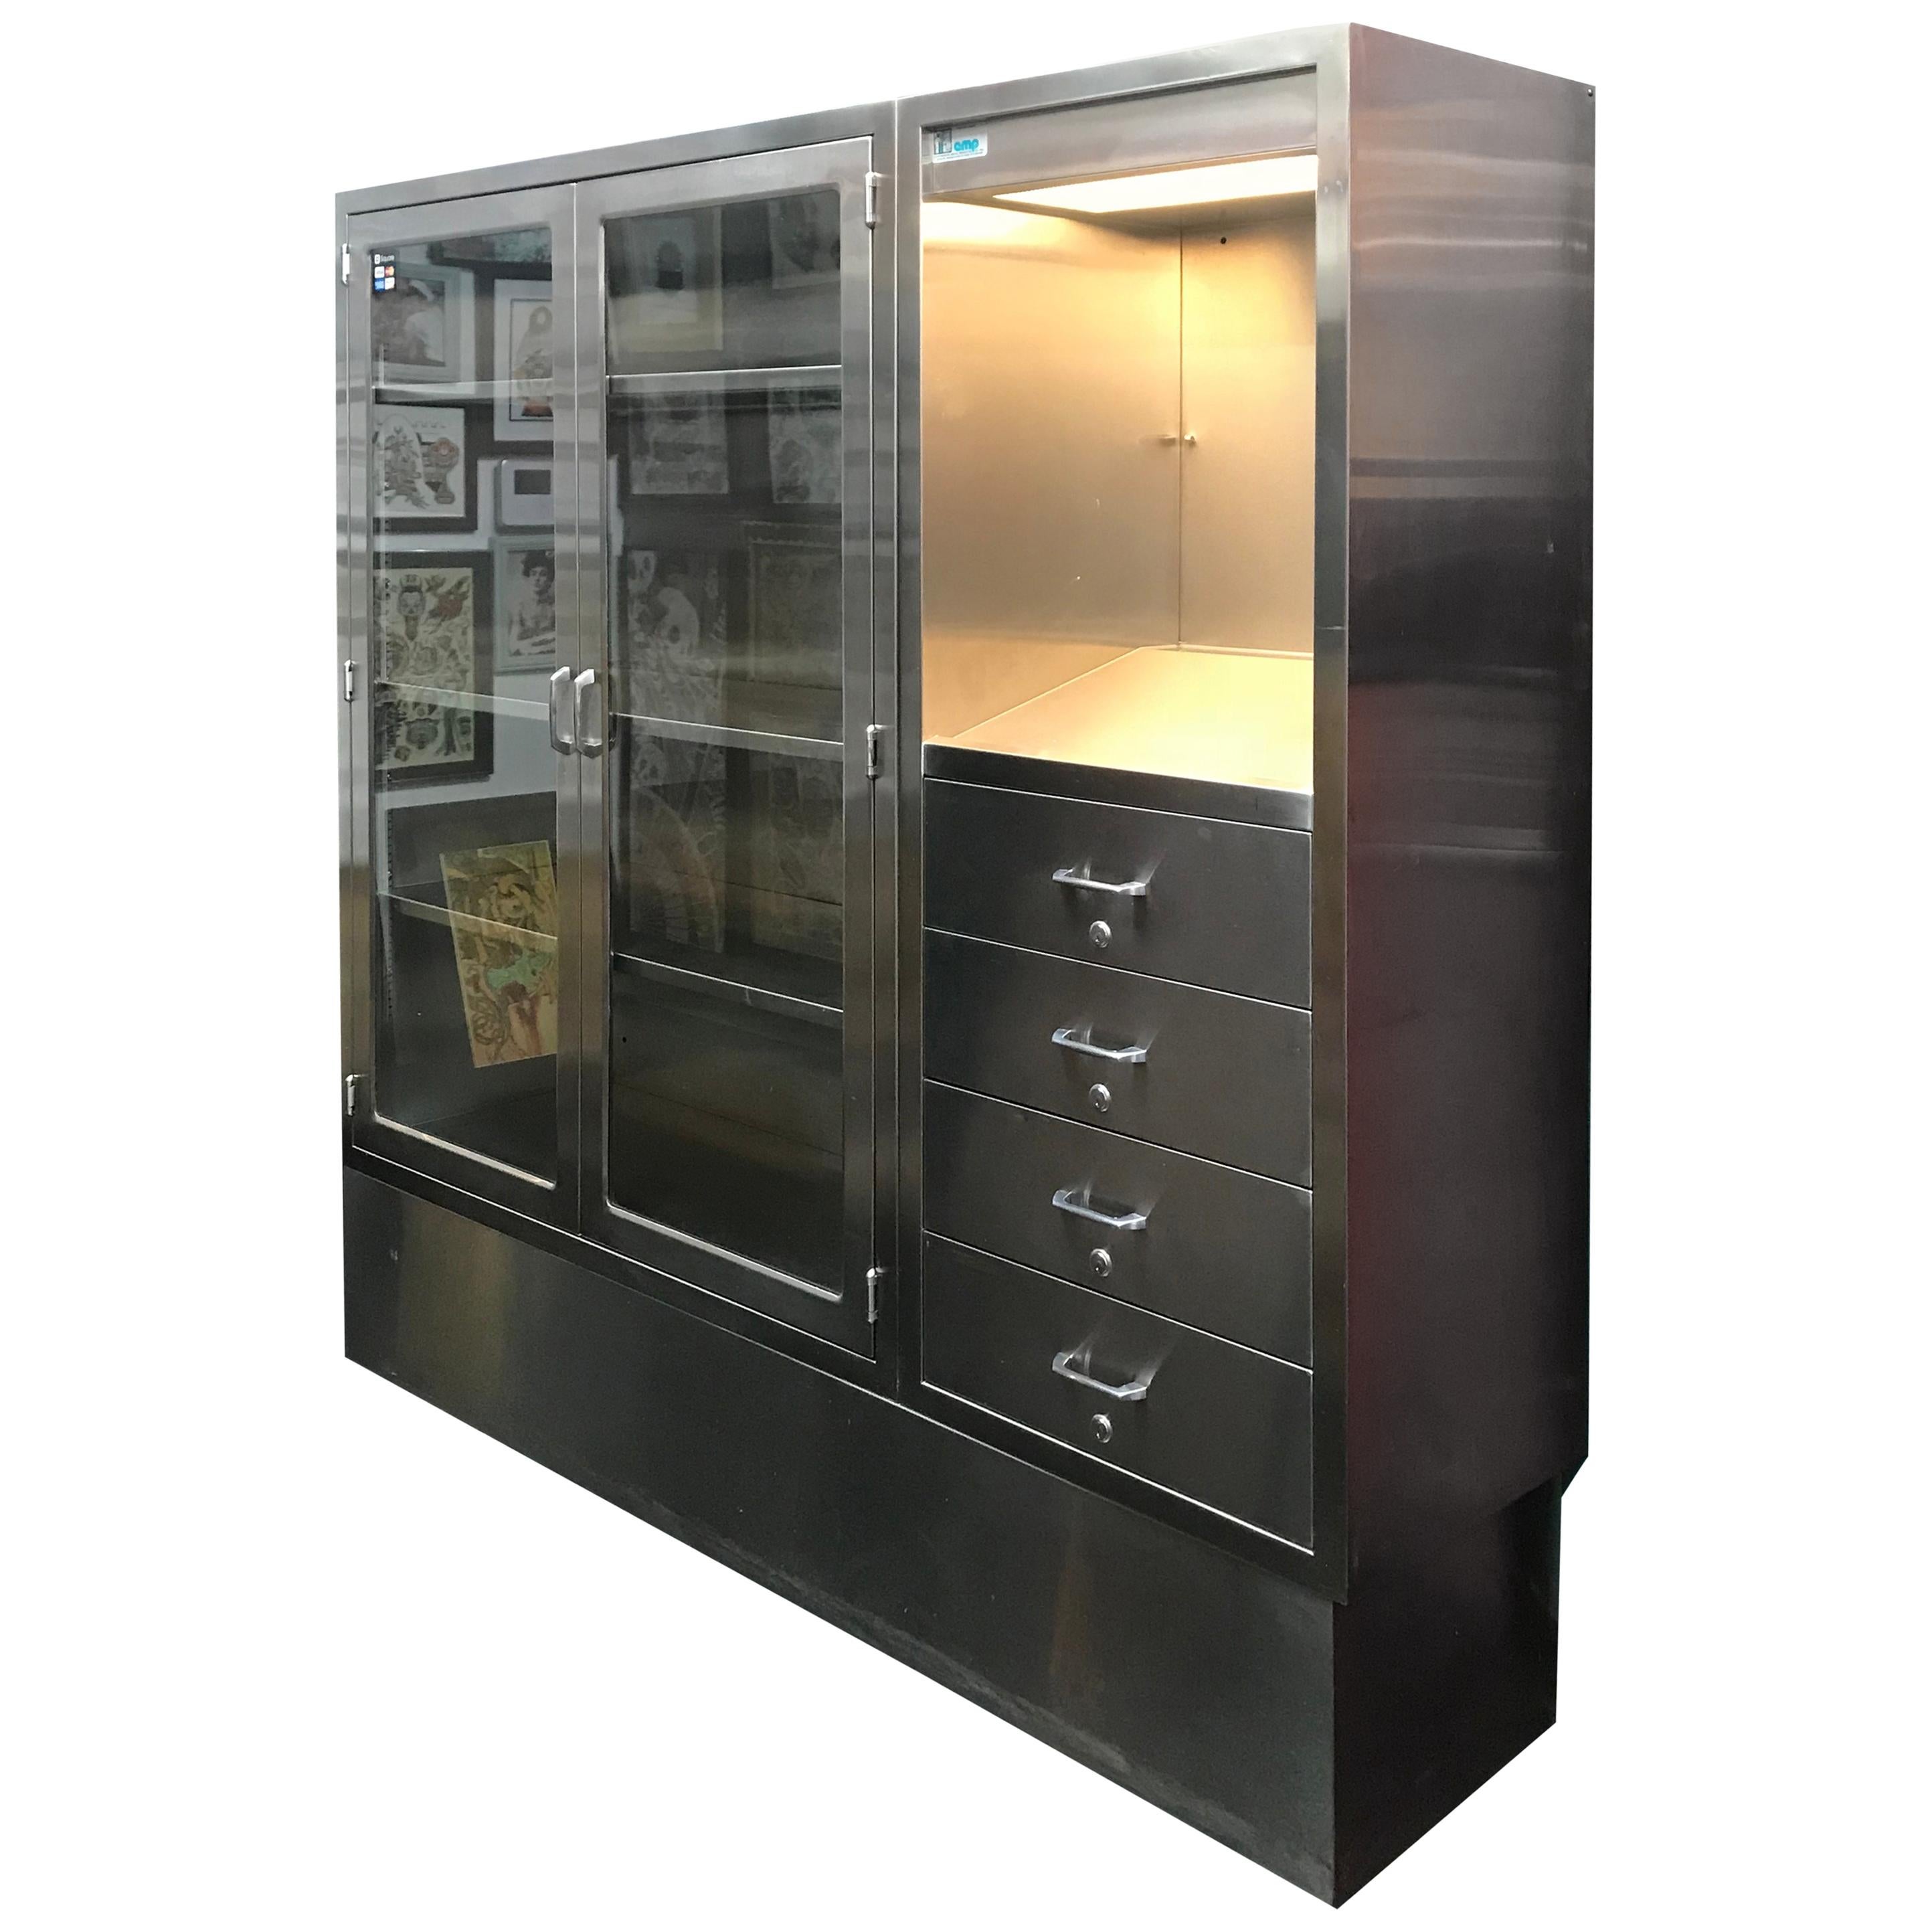 Medical Cabinet of Stainless Steel and Glass Panels with Adjustable Shelves